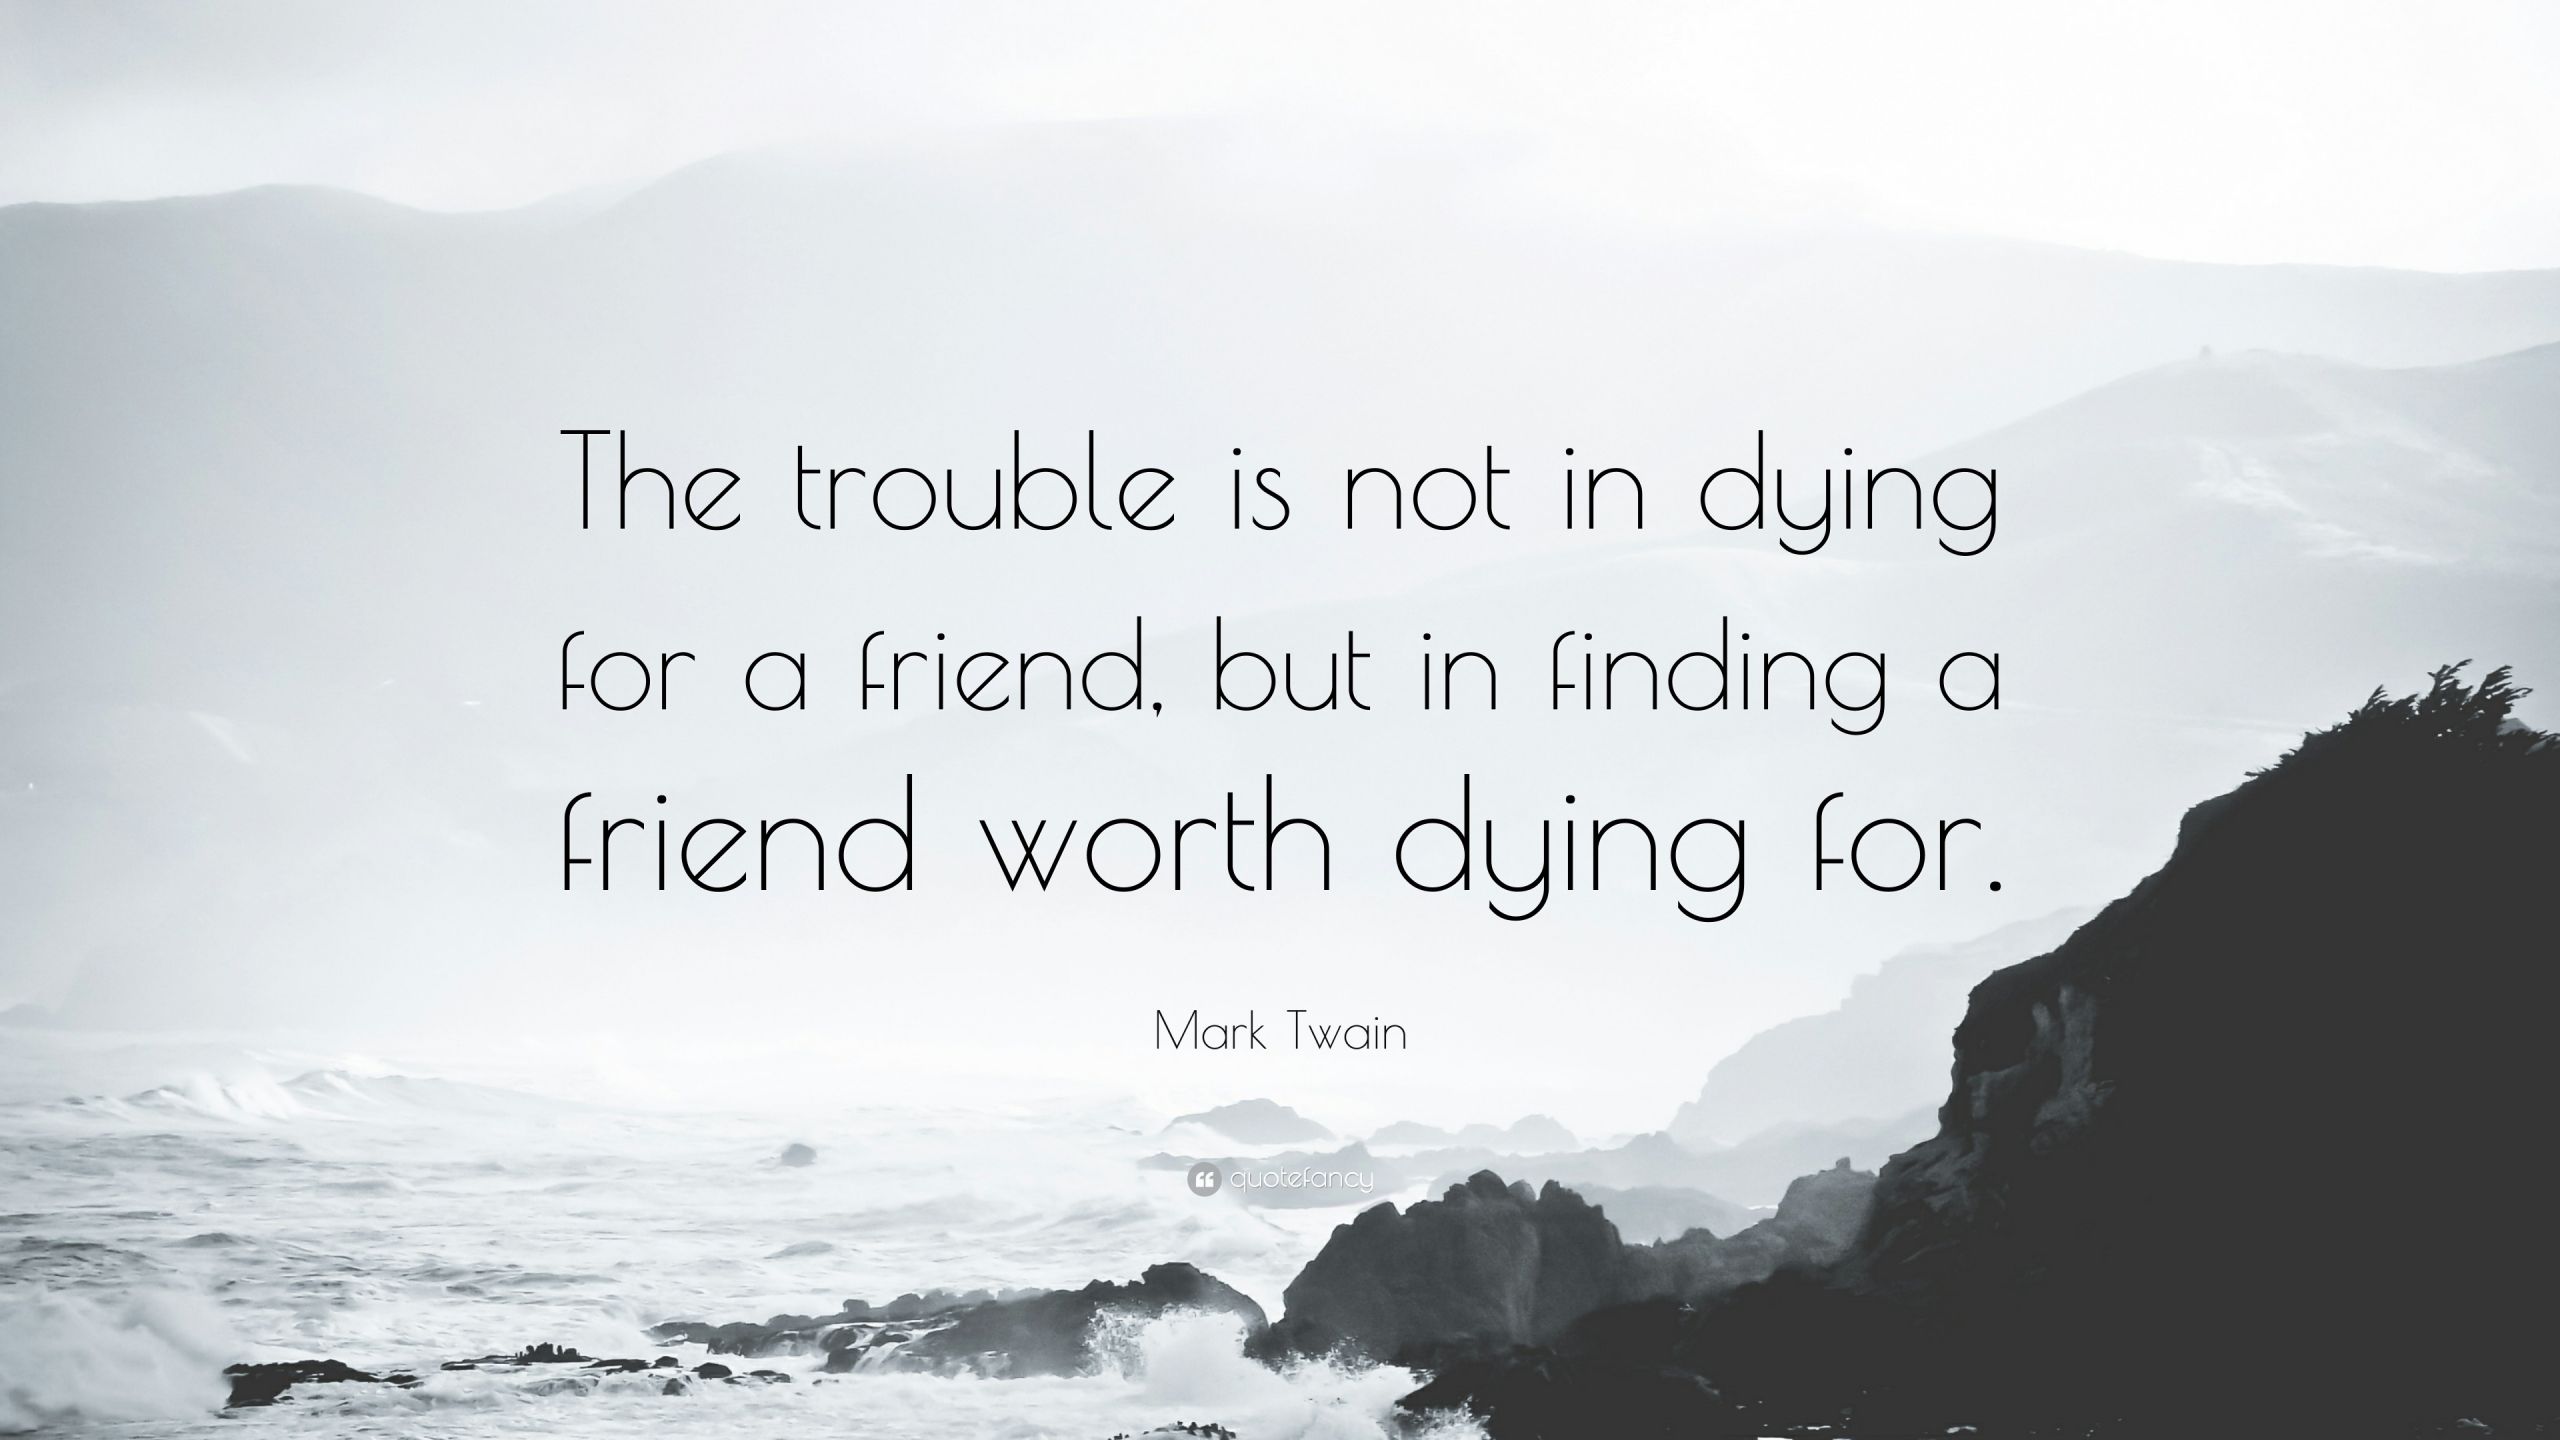 Mark Twain Friendship Quotes
 Friendship Quotes 21 wallpapers Quotefancy